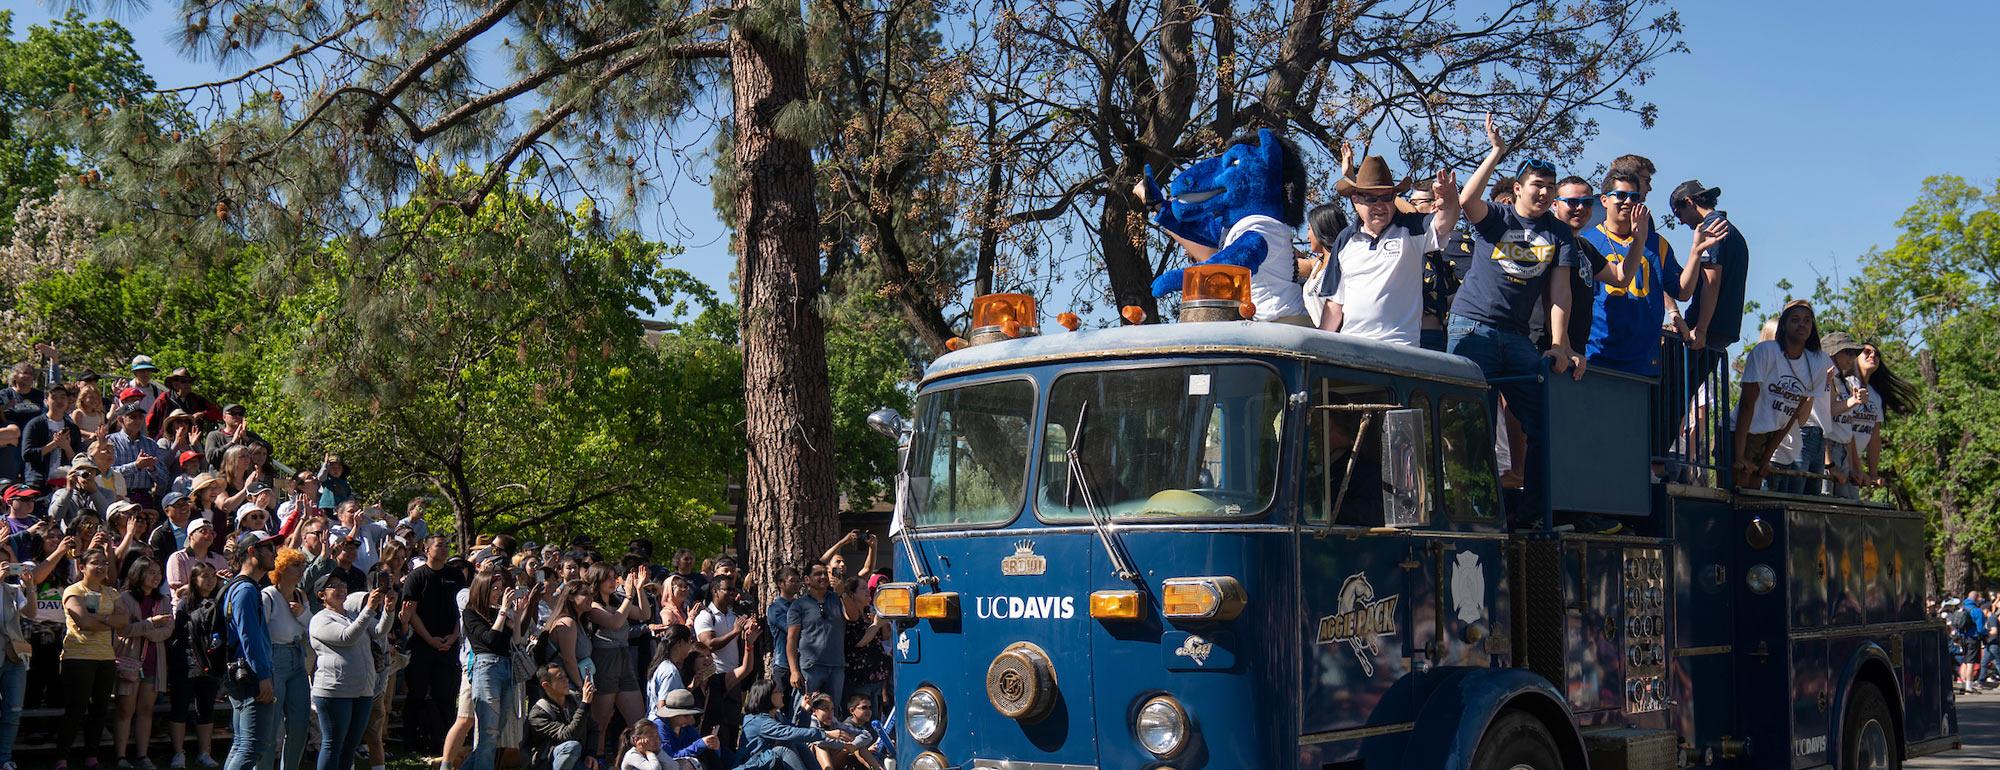 Our custom UC Davis fire engine carrying some of our student athletes during the Annual Picnic Day parade